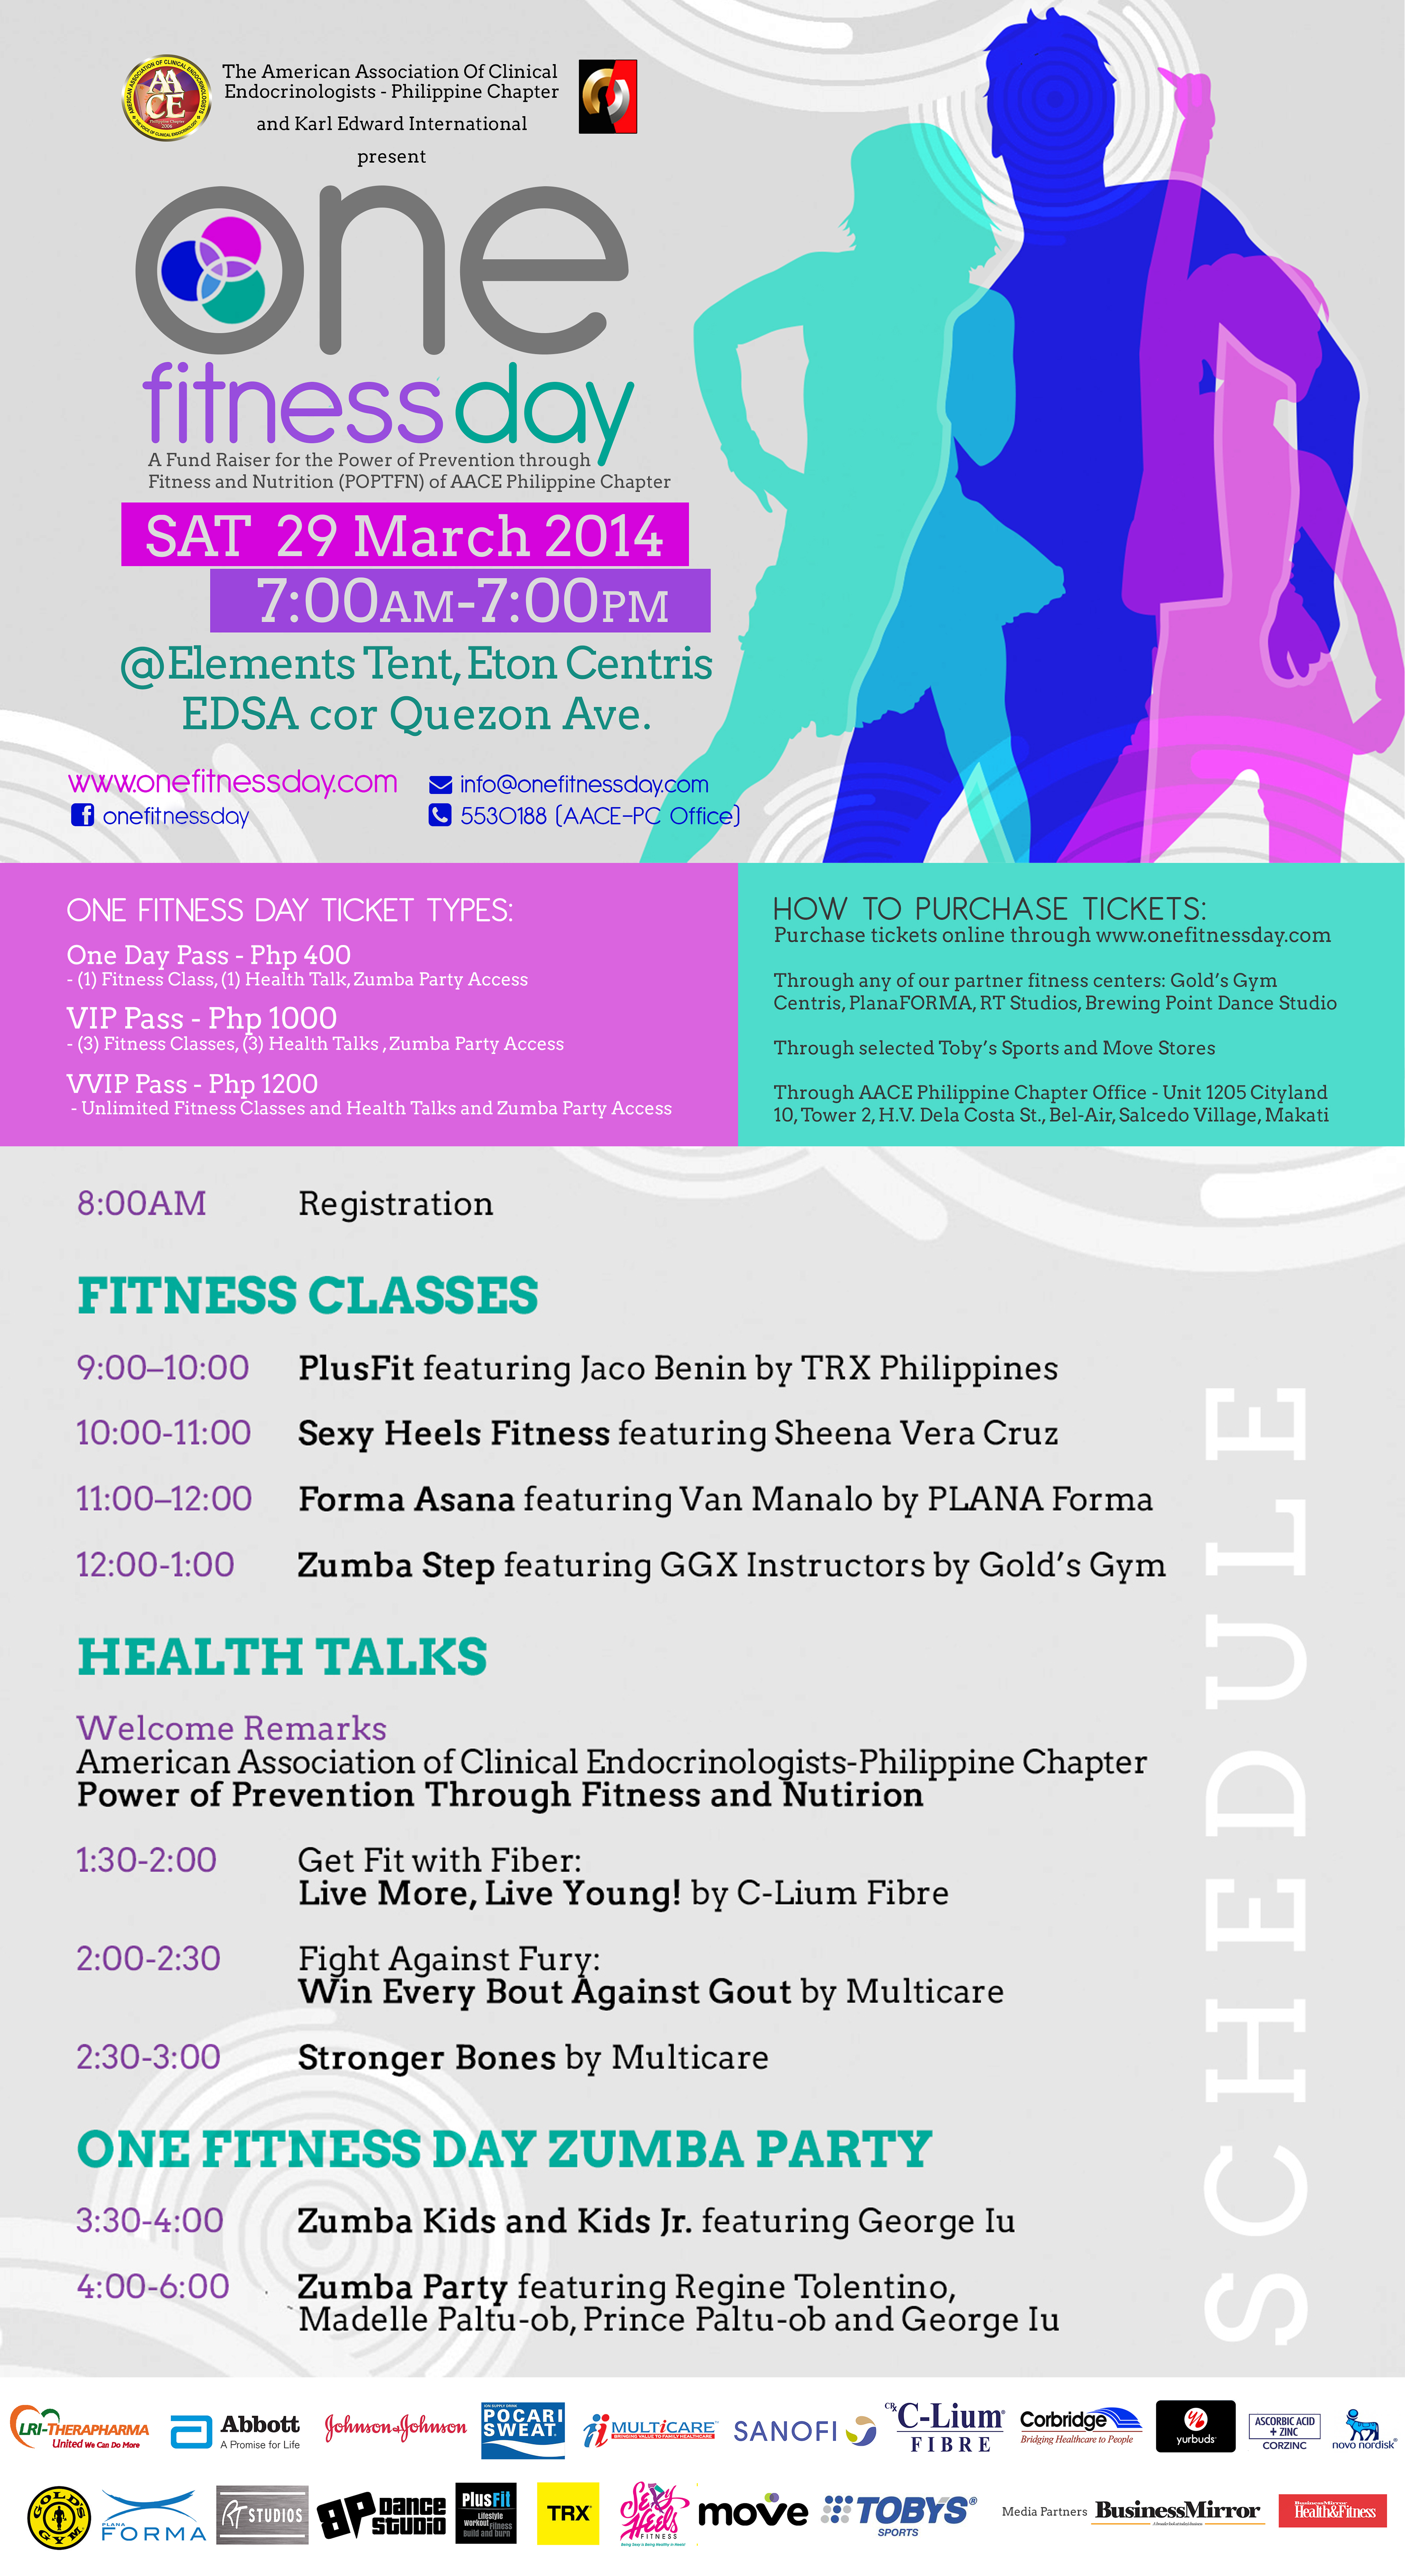 one-fitness-day-party-2014-poster